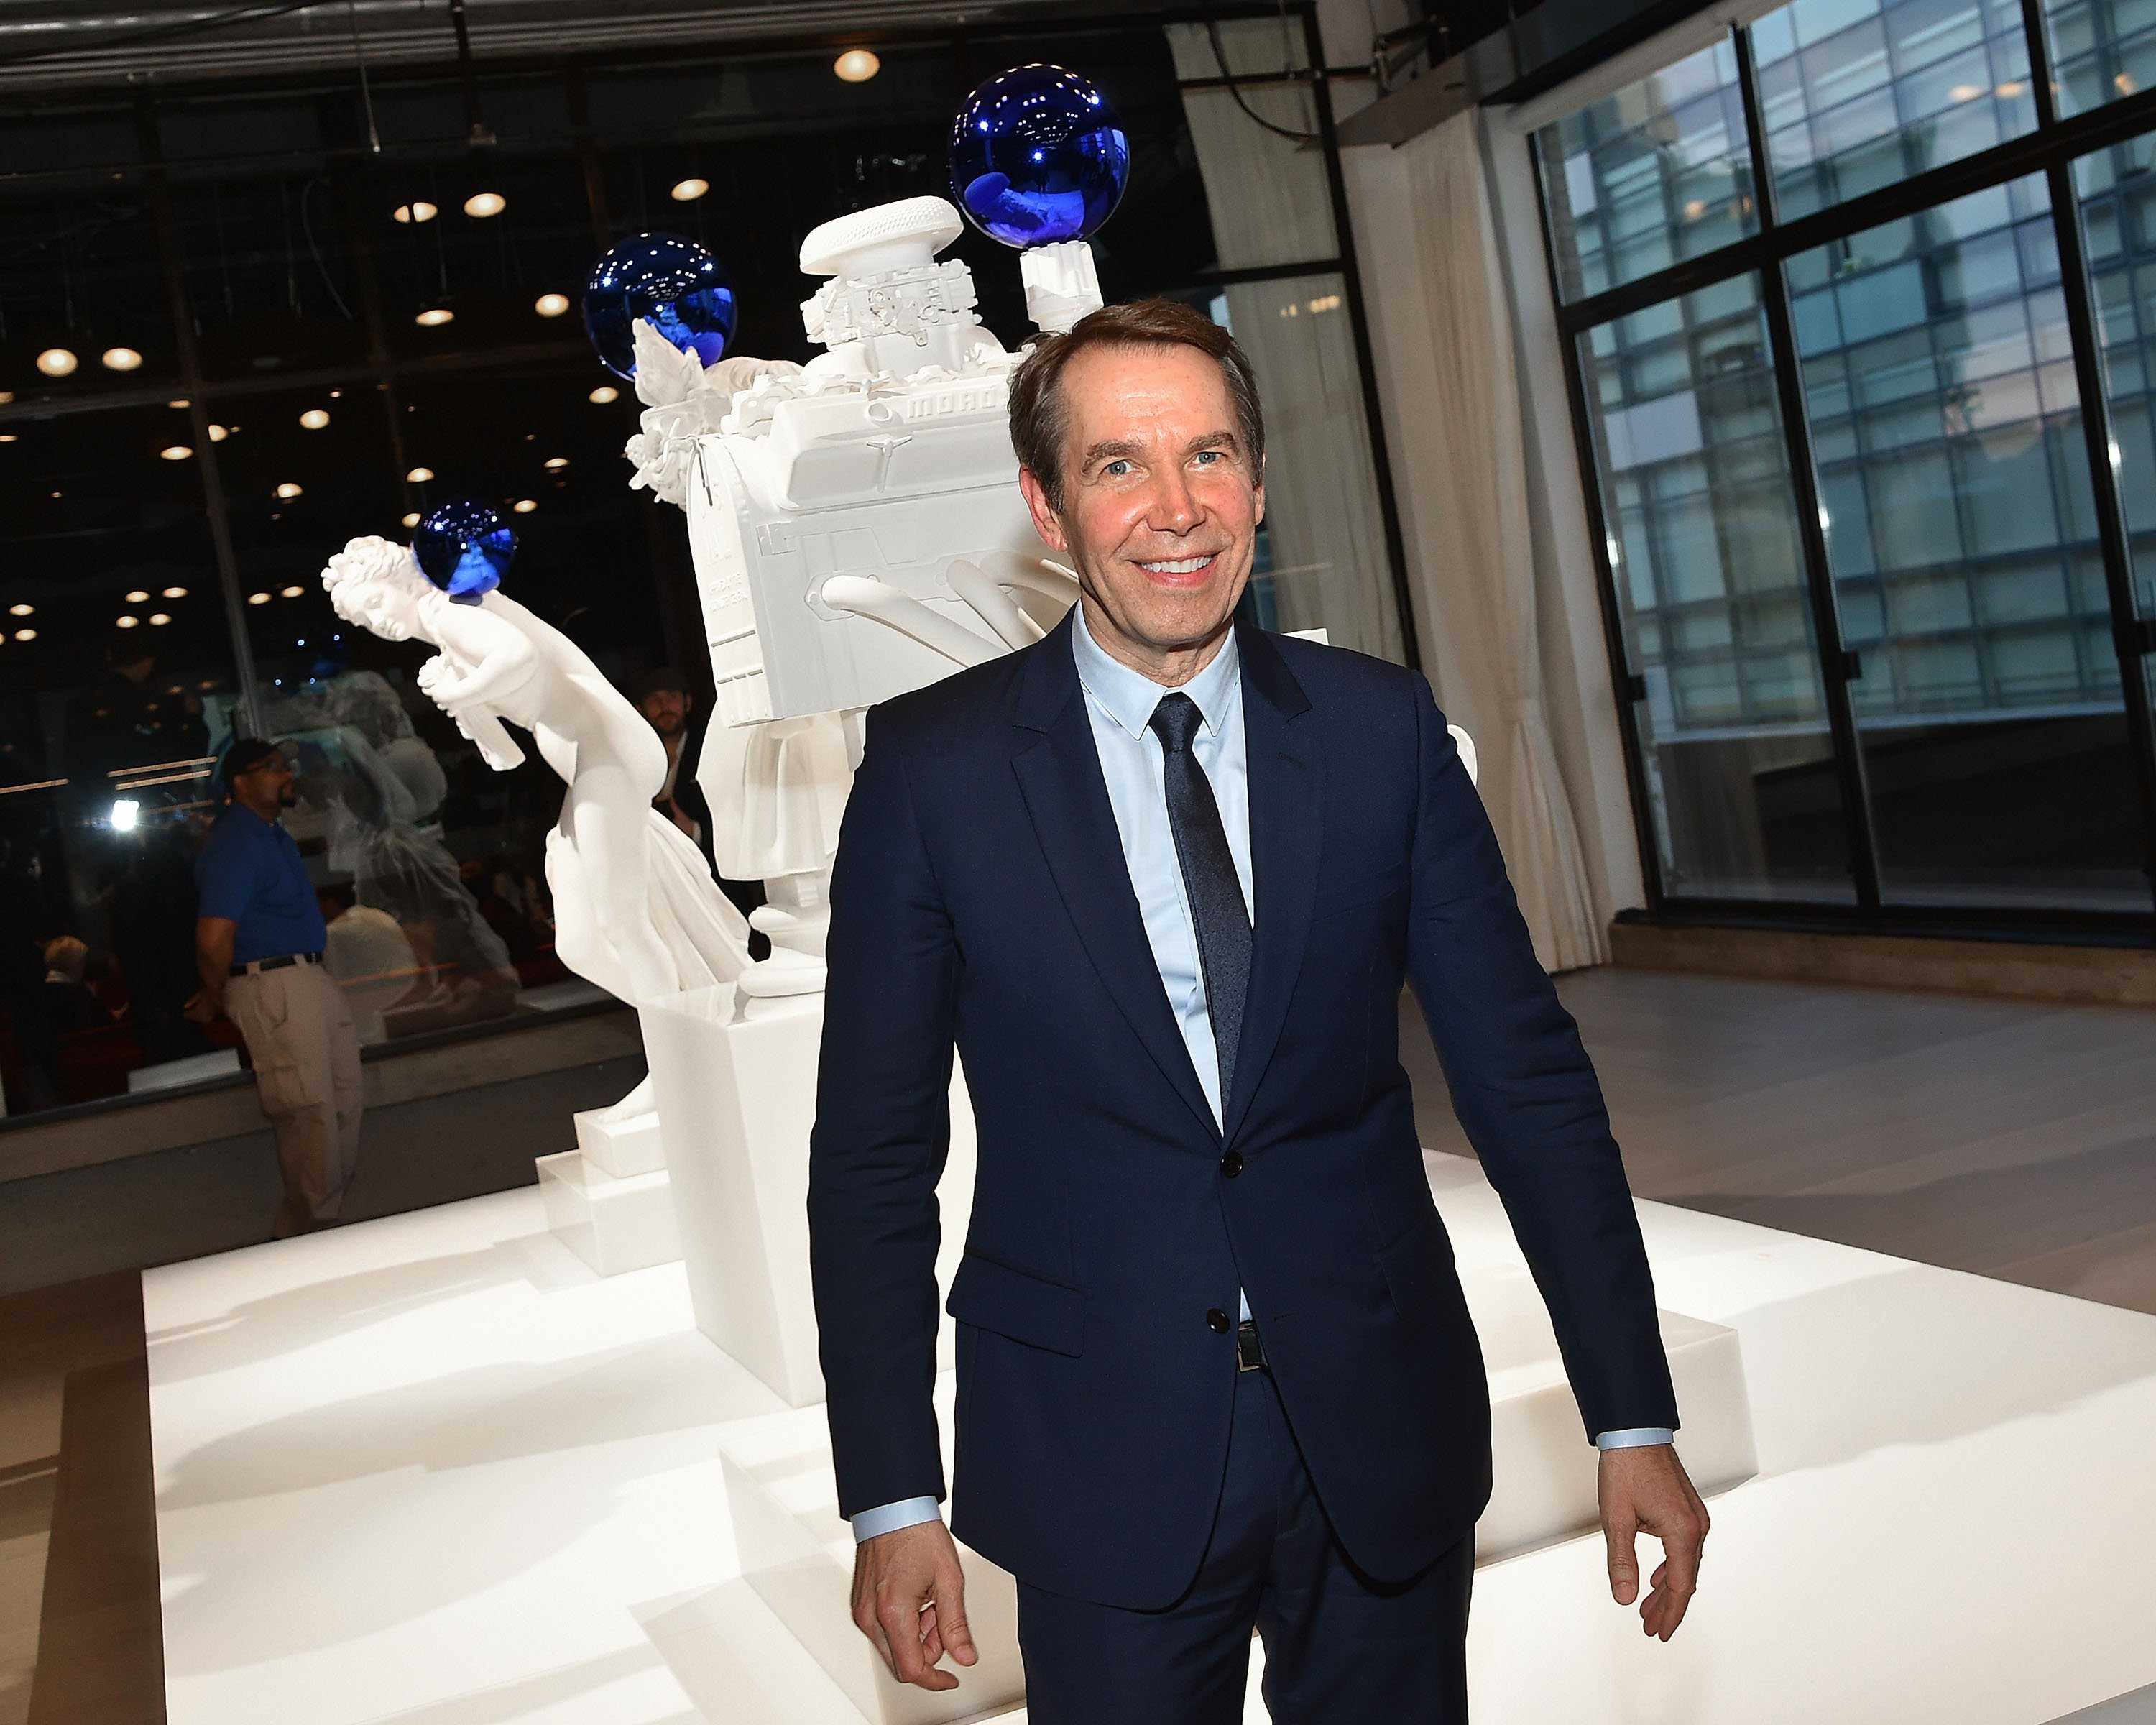 Artist Jeff Koons attends the Jeff Koons x Google launch on May 09, 2016 in New York, New York. Photo courtesy of Ben Gabbe/Getty Images.